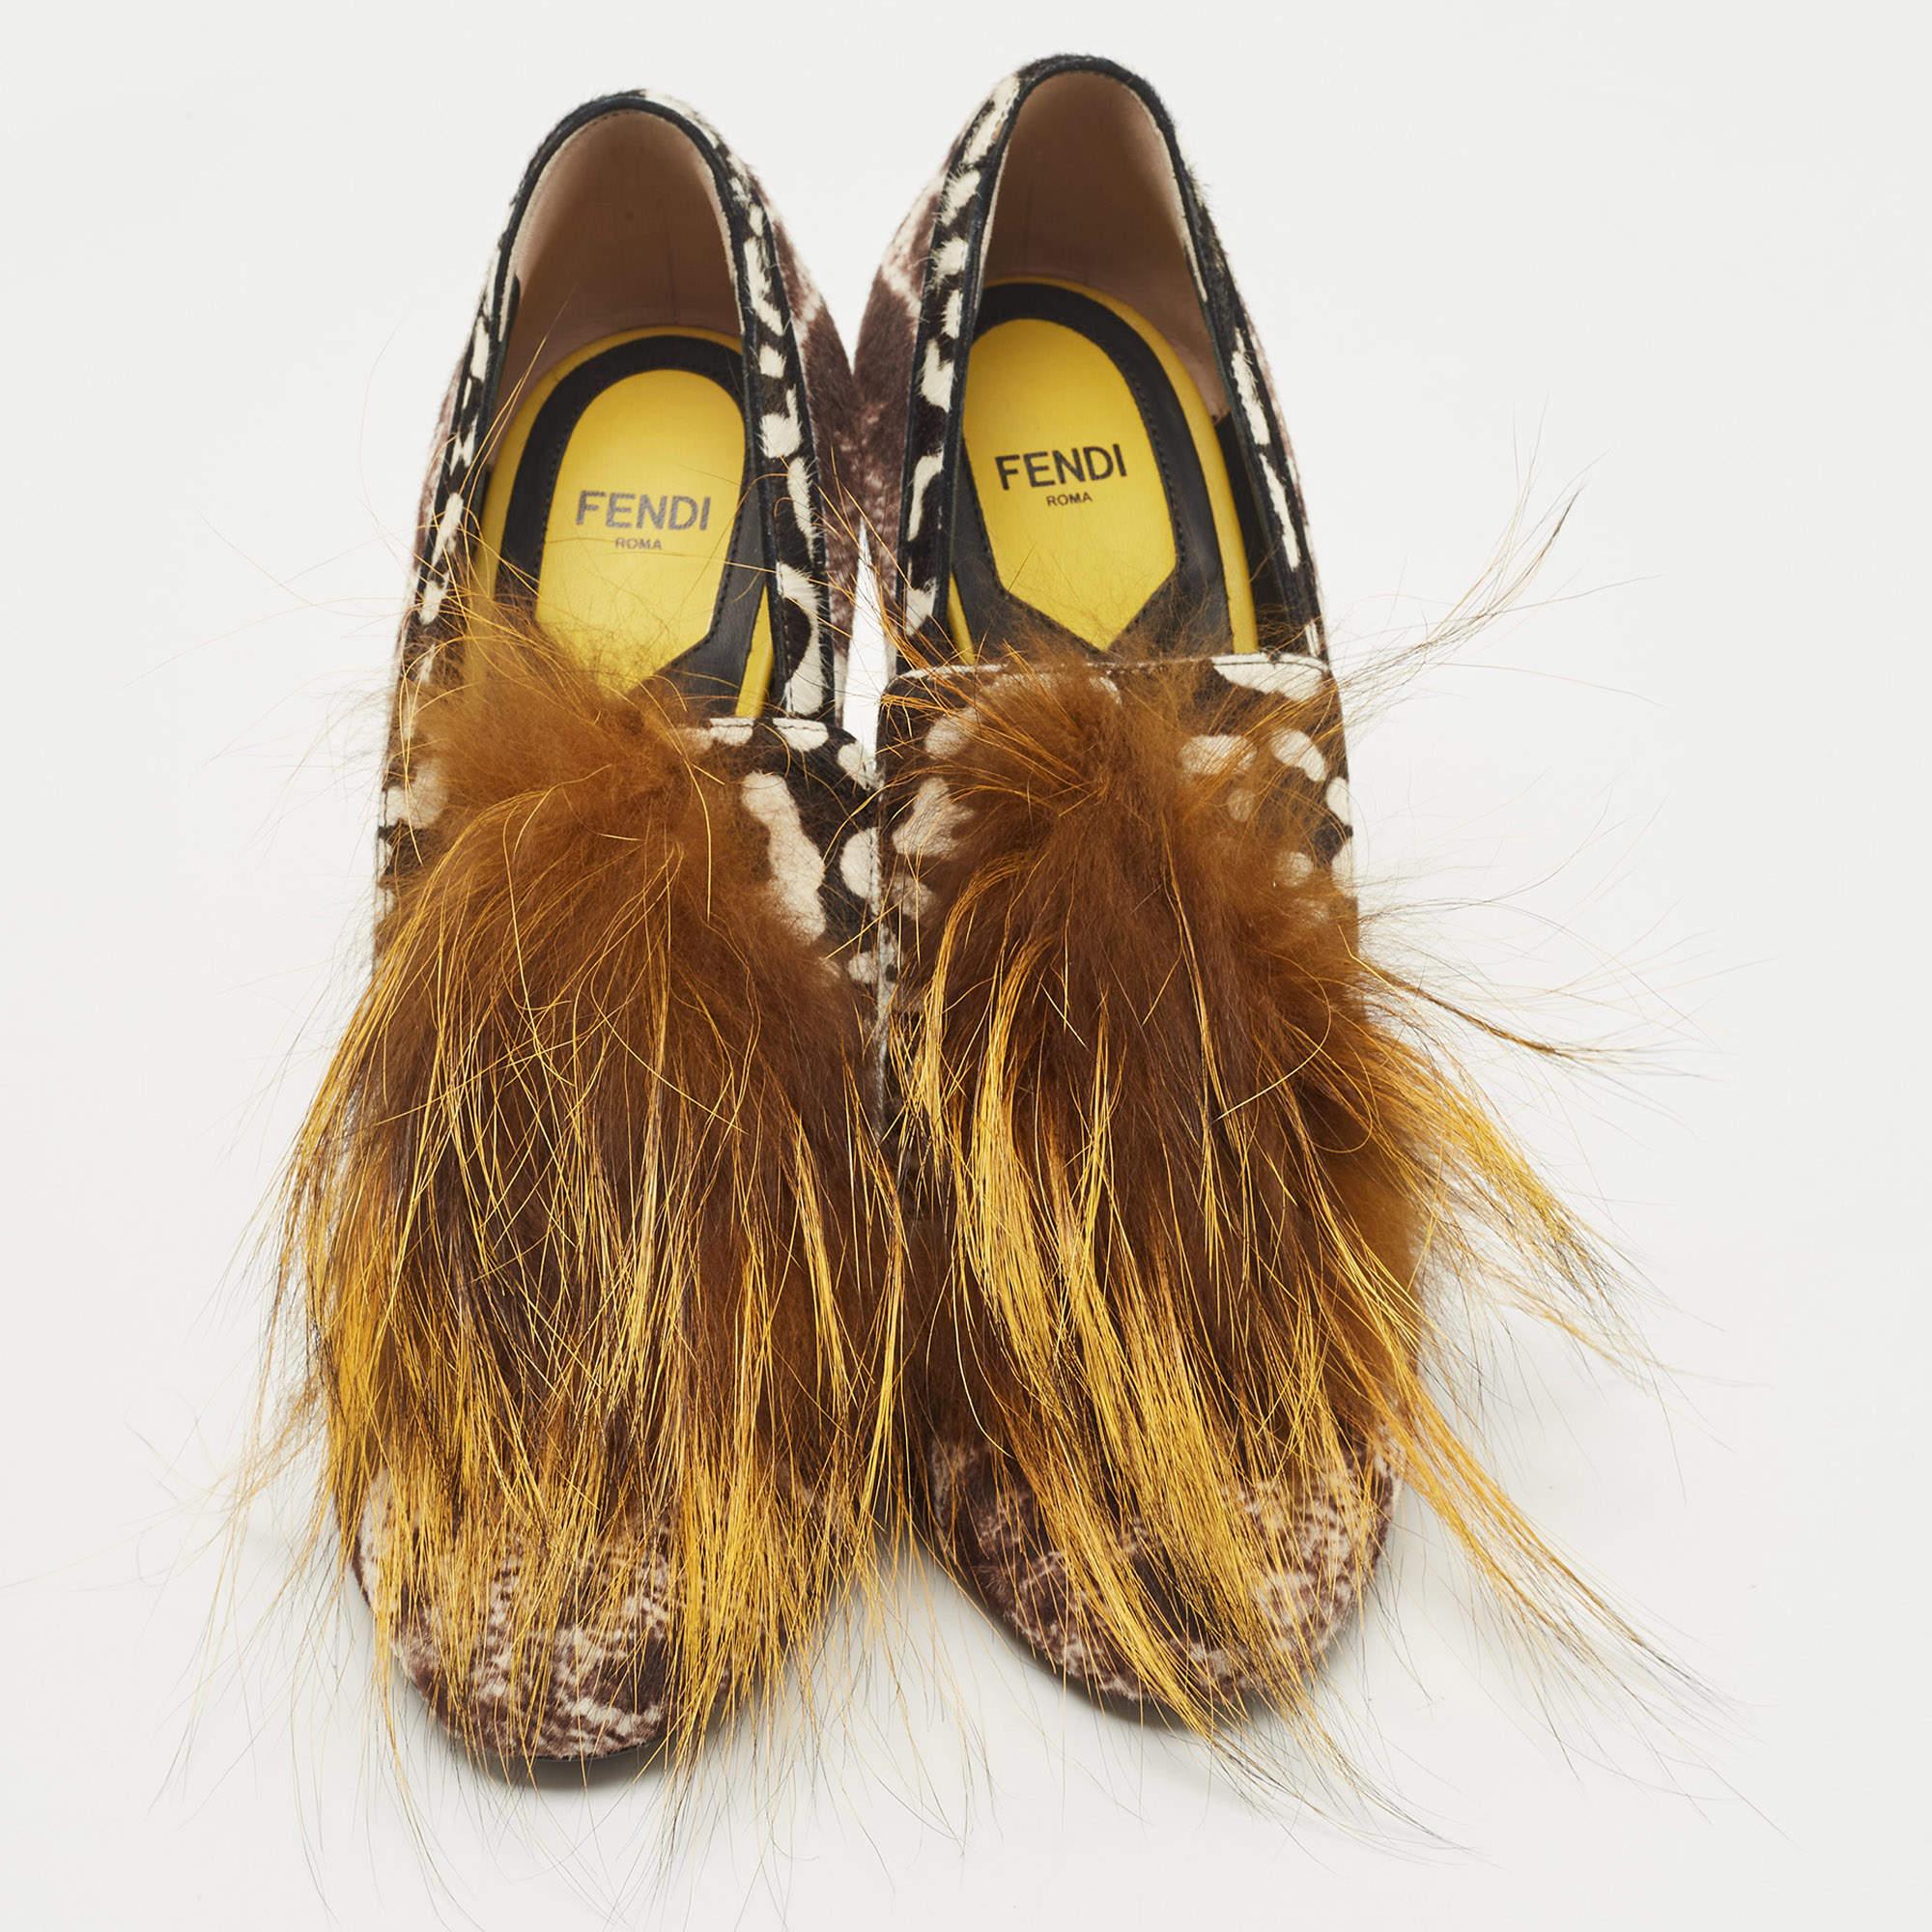 Upgrade your style quotient by adding these Fendi pumps to your wardrobe! They have been artistically crafted from printed calf hair and fox fur. They come equipped with comfortable leather-lined insoles and are elevated on block heels. This is one